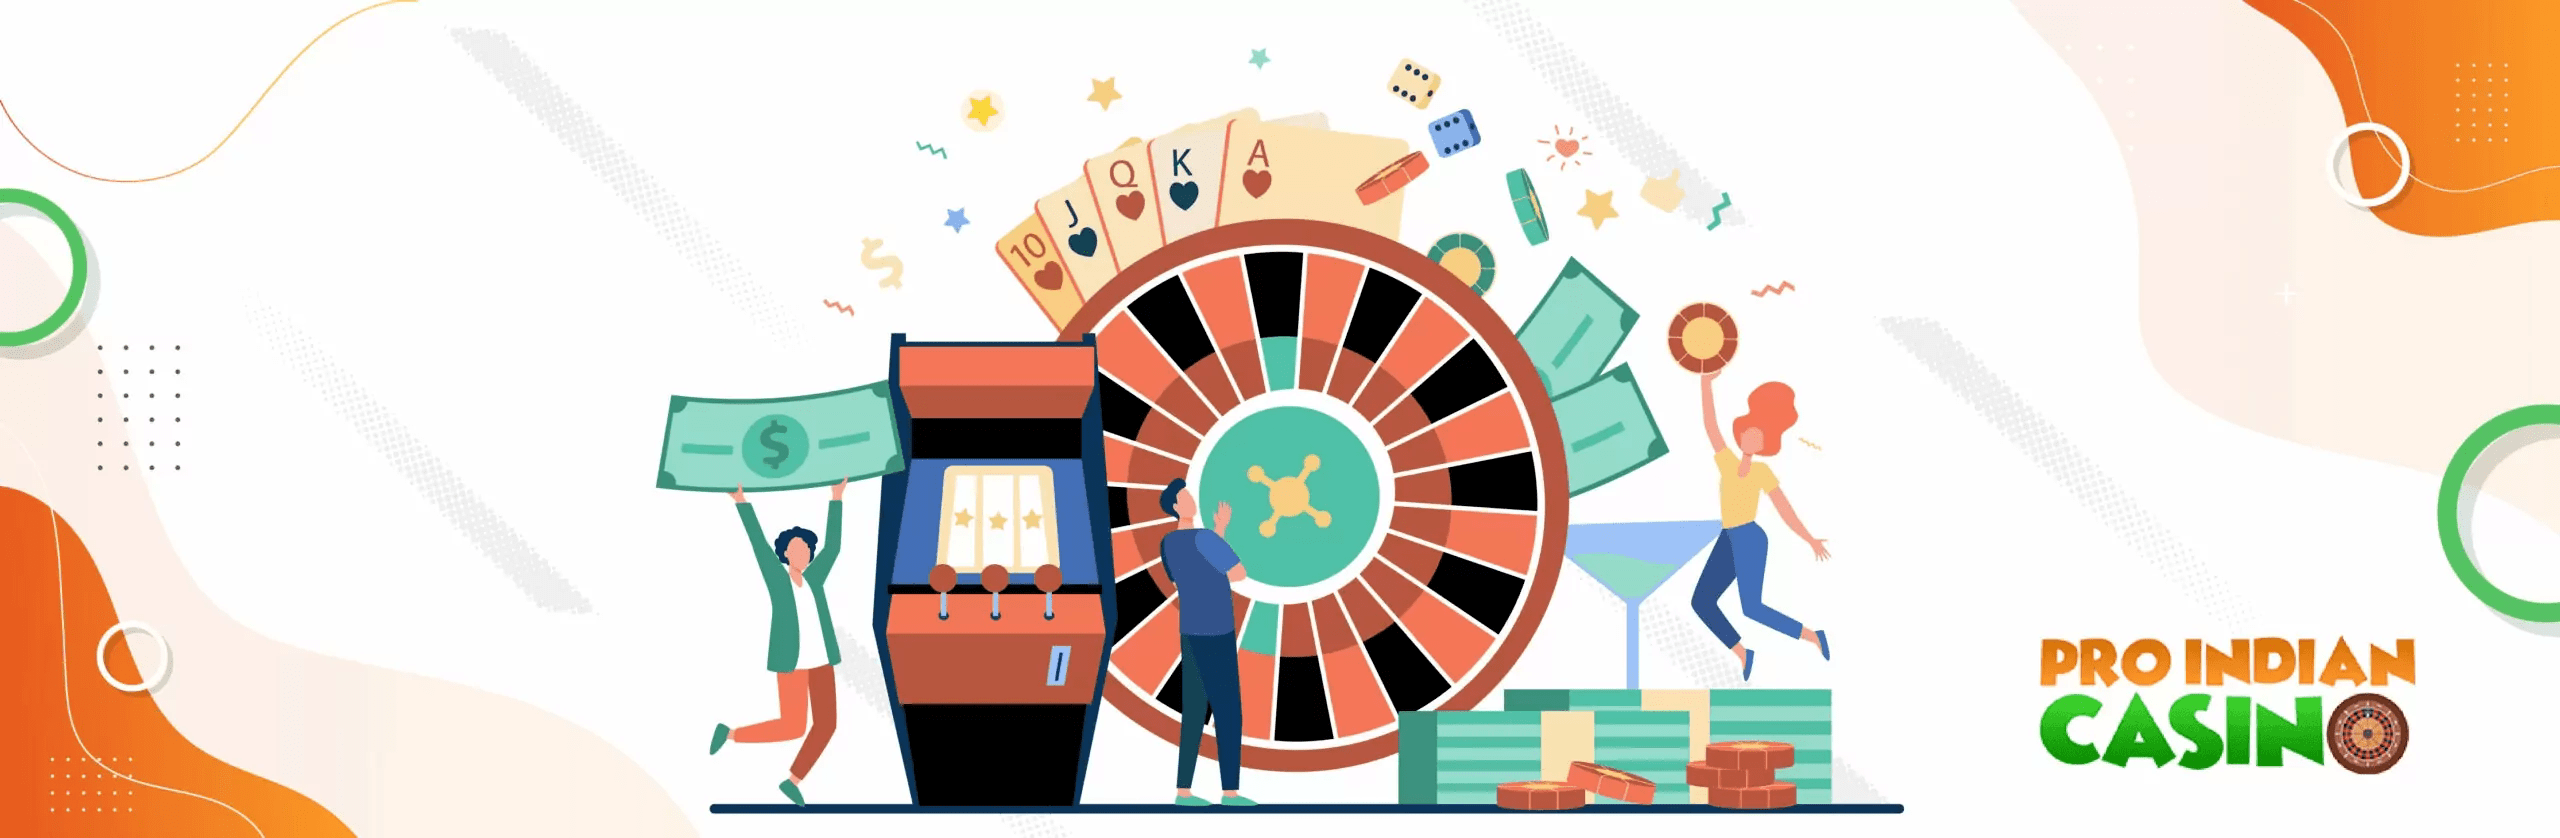 How-to-play-online-roulette-games-scaled-1.webp-min